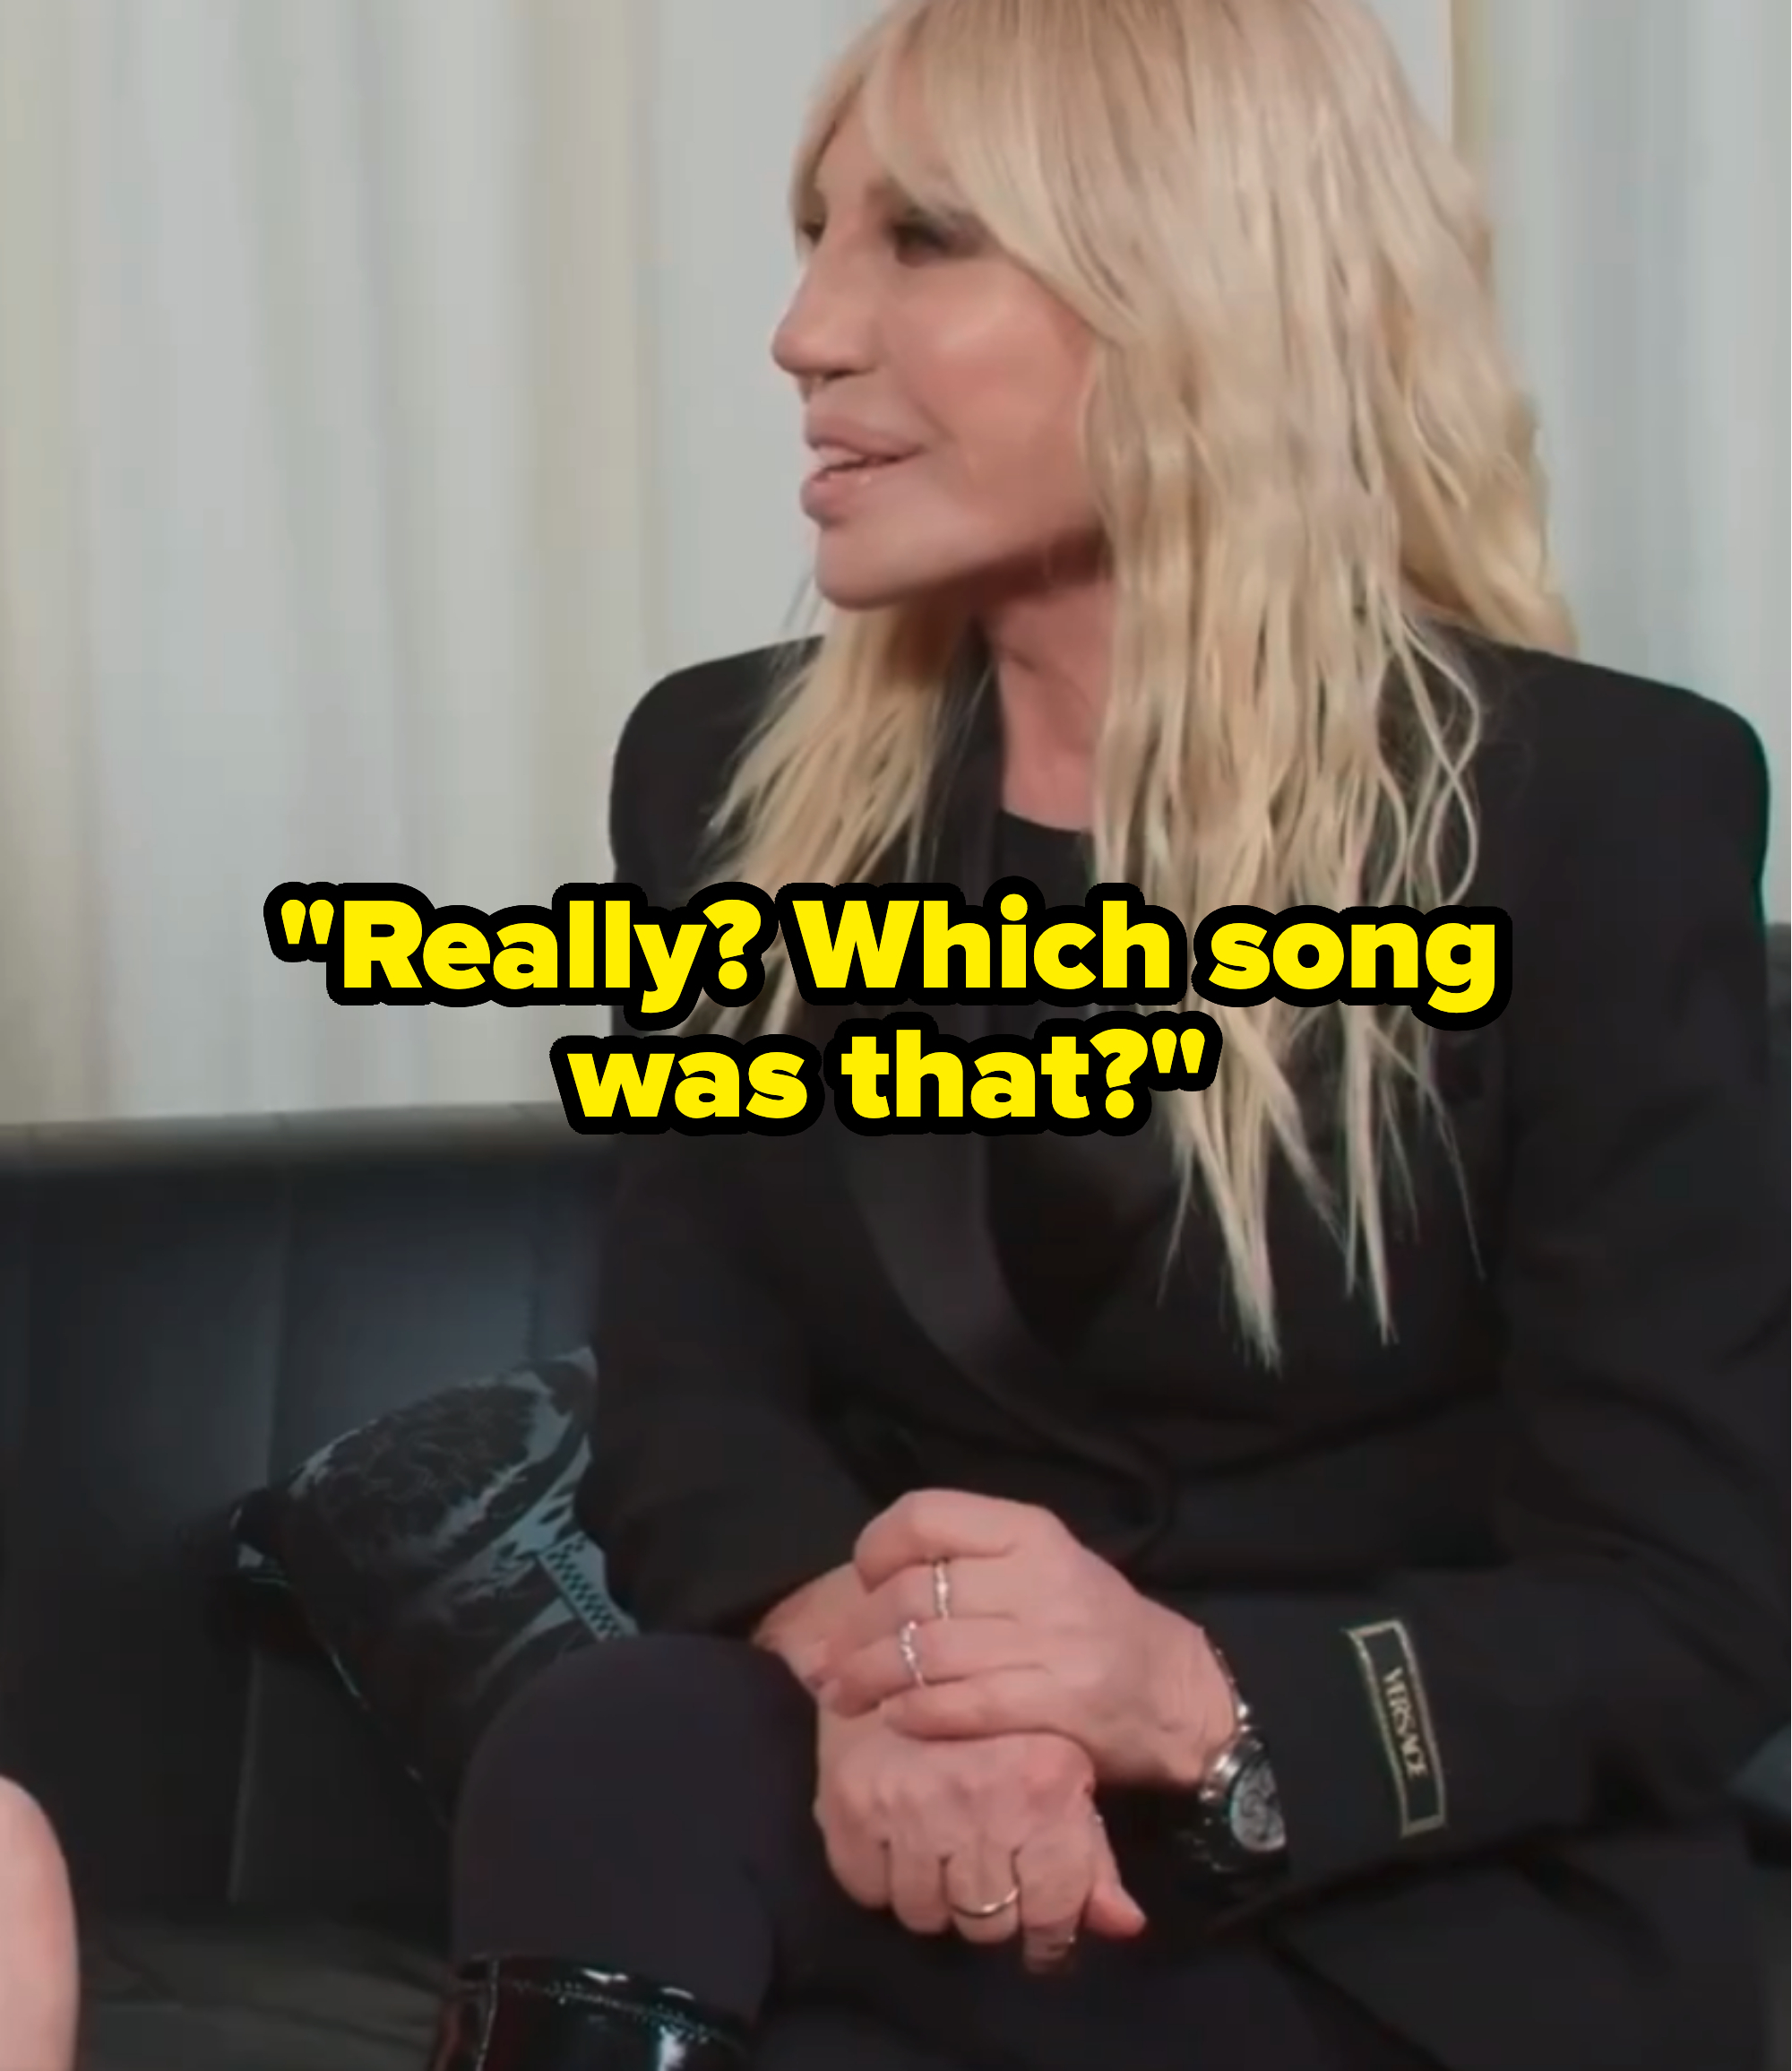 Donatella Versace wearing a black blazer, seated and engaged in conversation